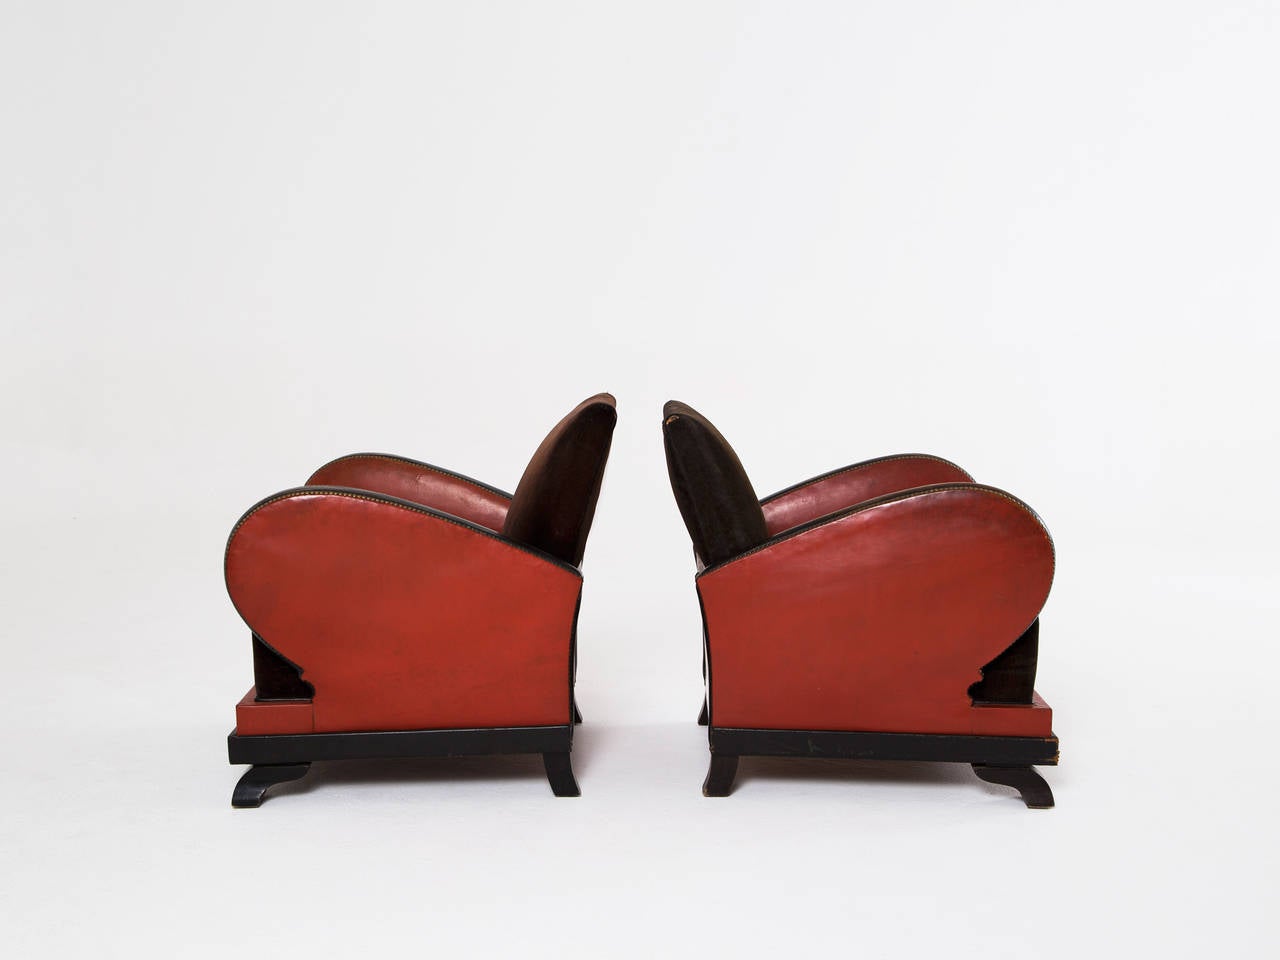 French Set of 2 Red and Black Art Deco Club Chairs